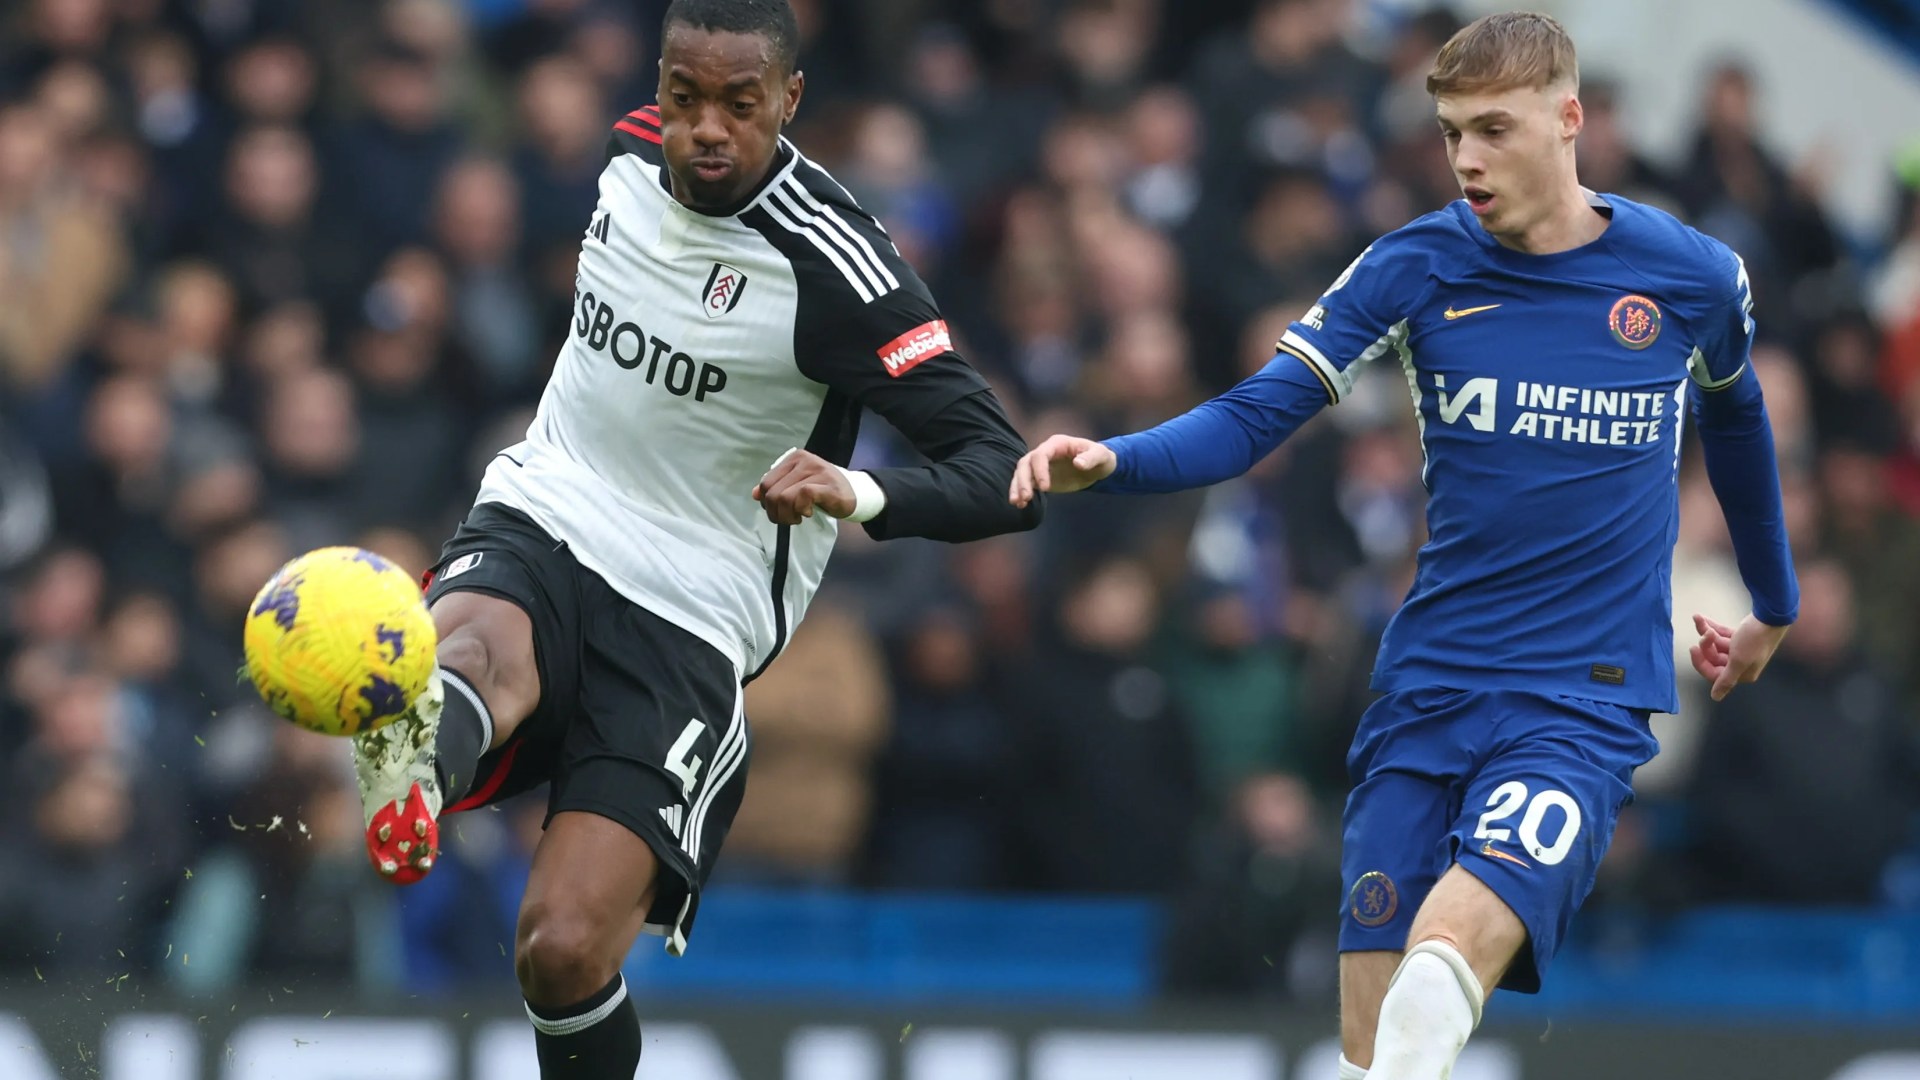 ‘He’s proper Chels’ – Chelsea fans dig up Tosin Adarabioyo’s old tweets that show his love for Blues legends [Video]